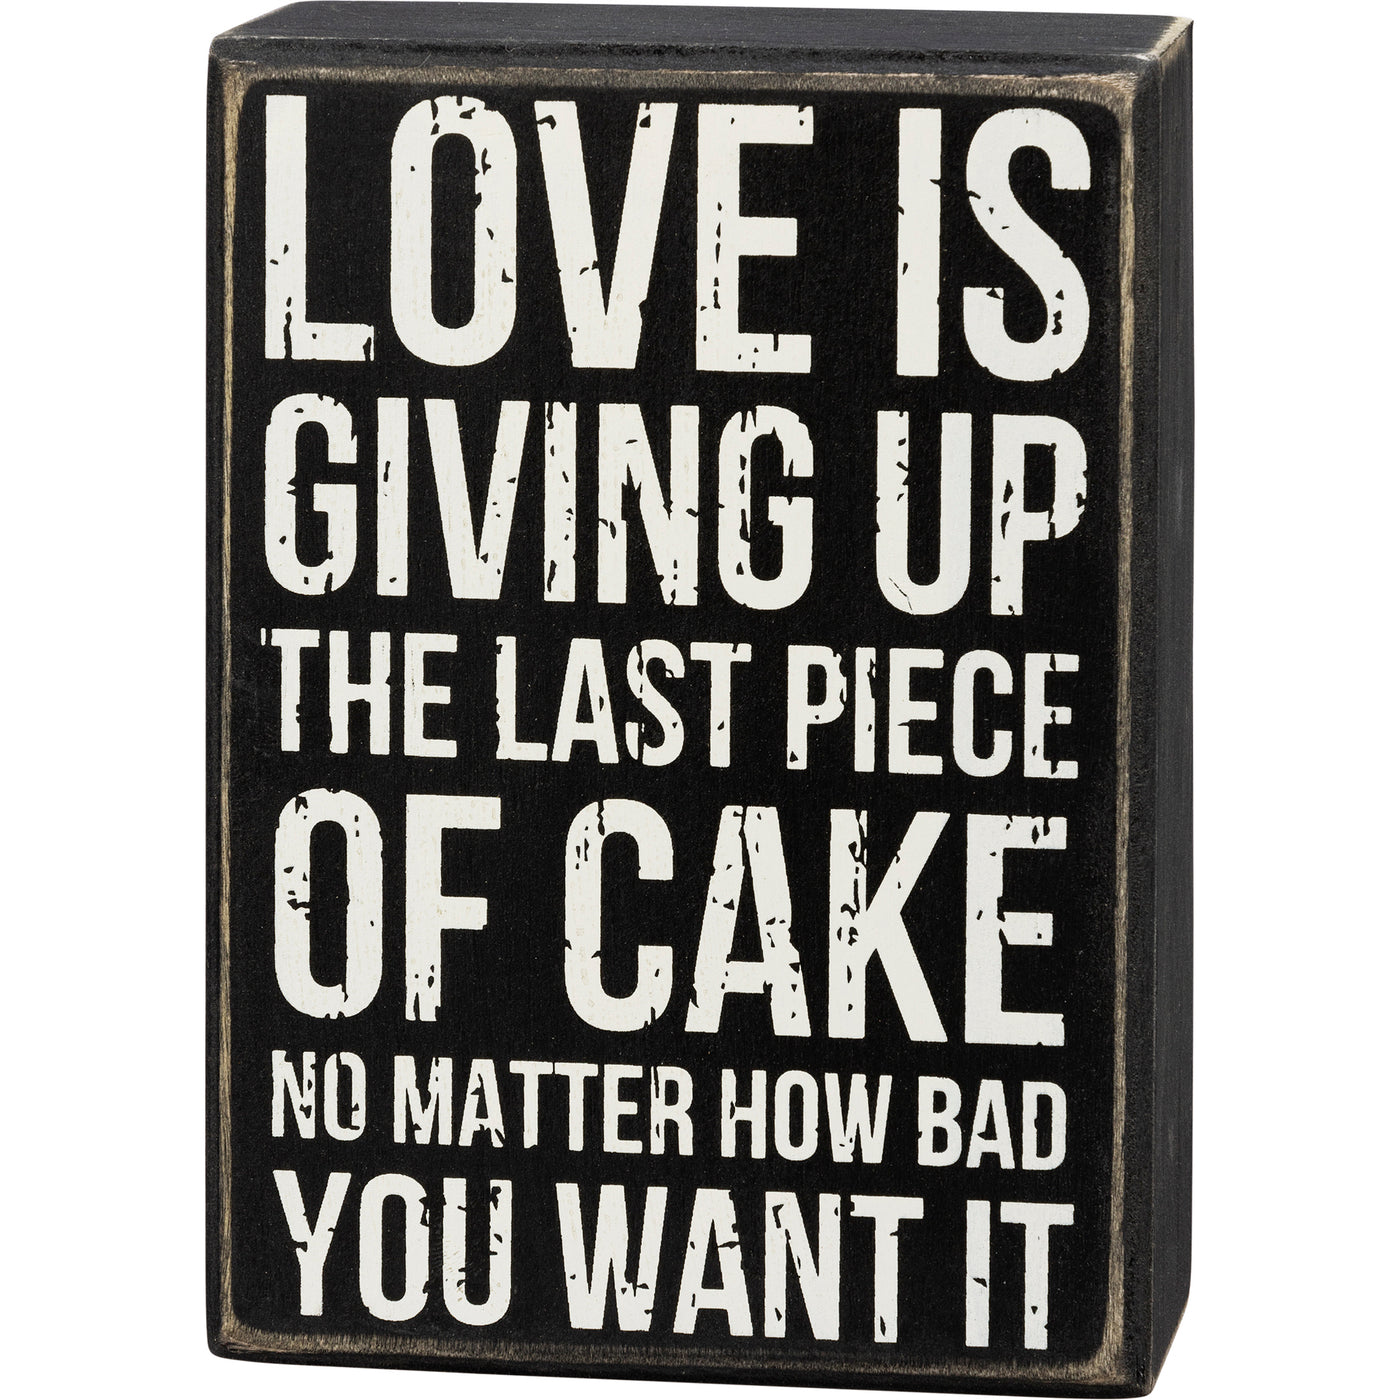 Surprise Me Sale 🤭 Love Is Giving Up The Last Piece Of Cake 5.75" Boxed Sign